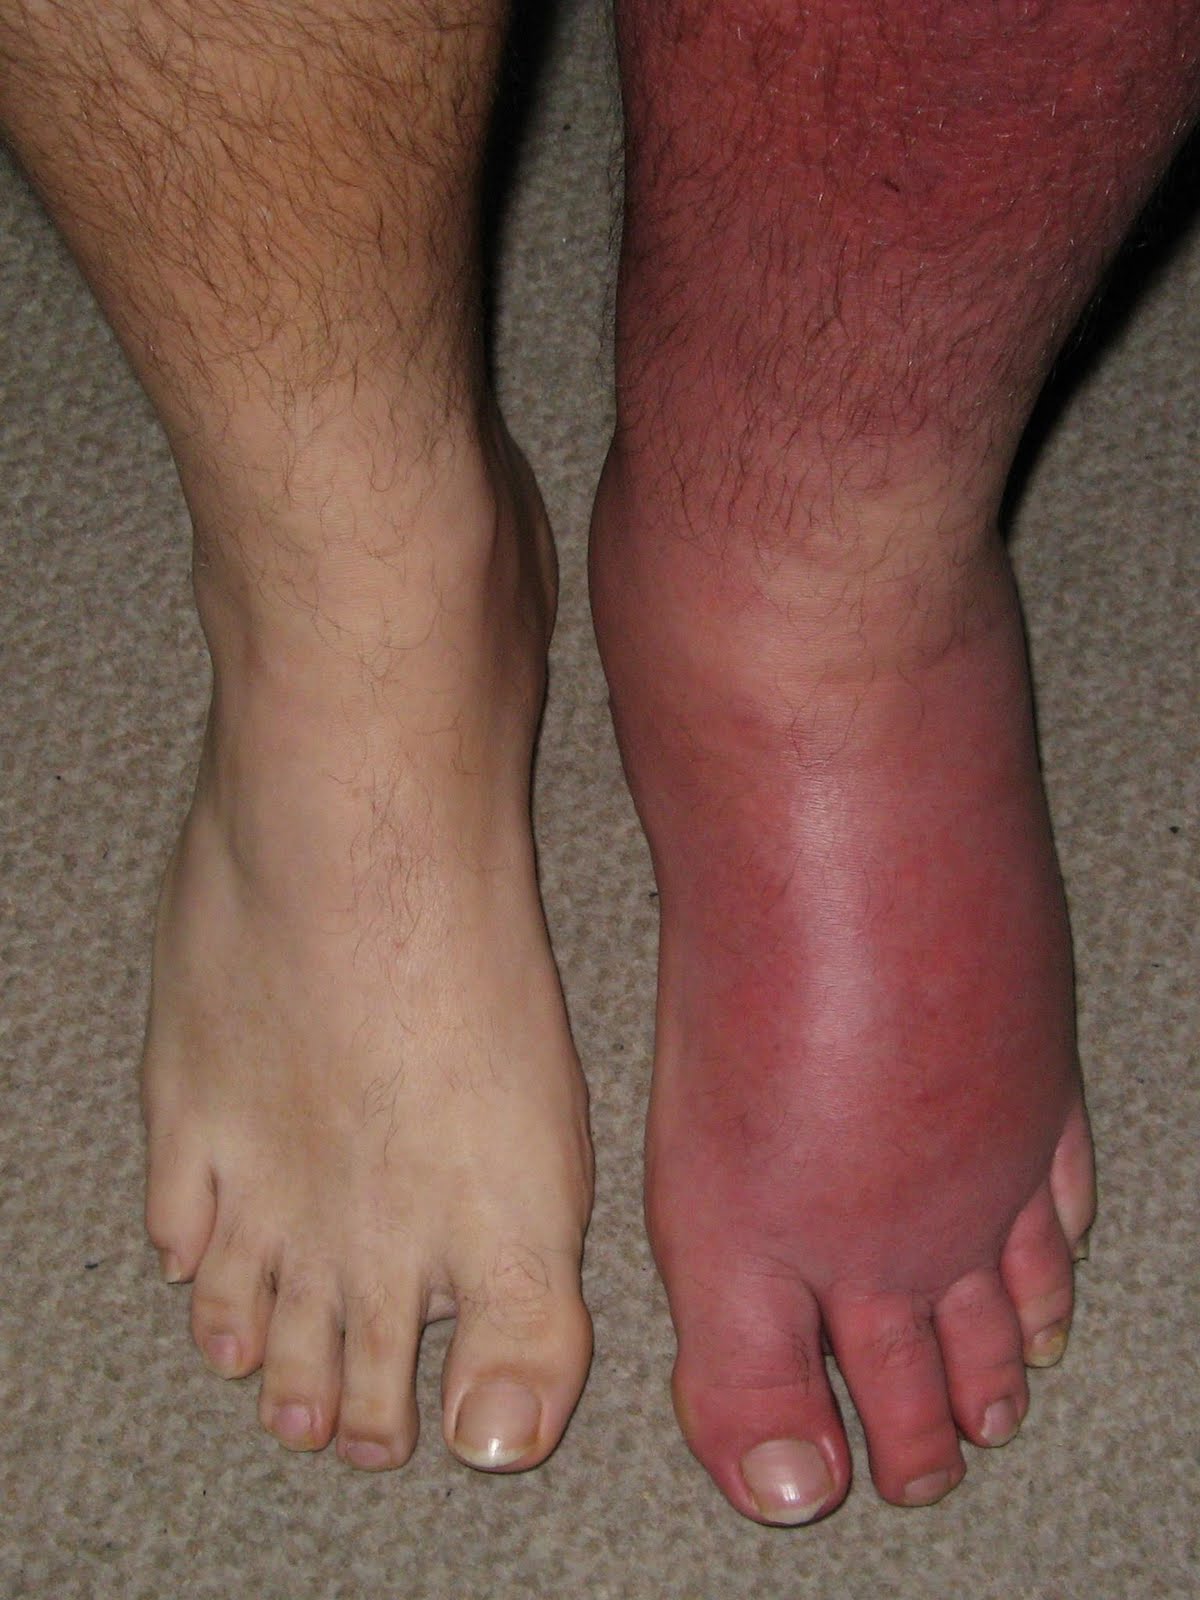 Causes of Red Swollen Feet & Ankles | LIVESTRONG.COM